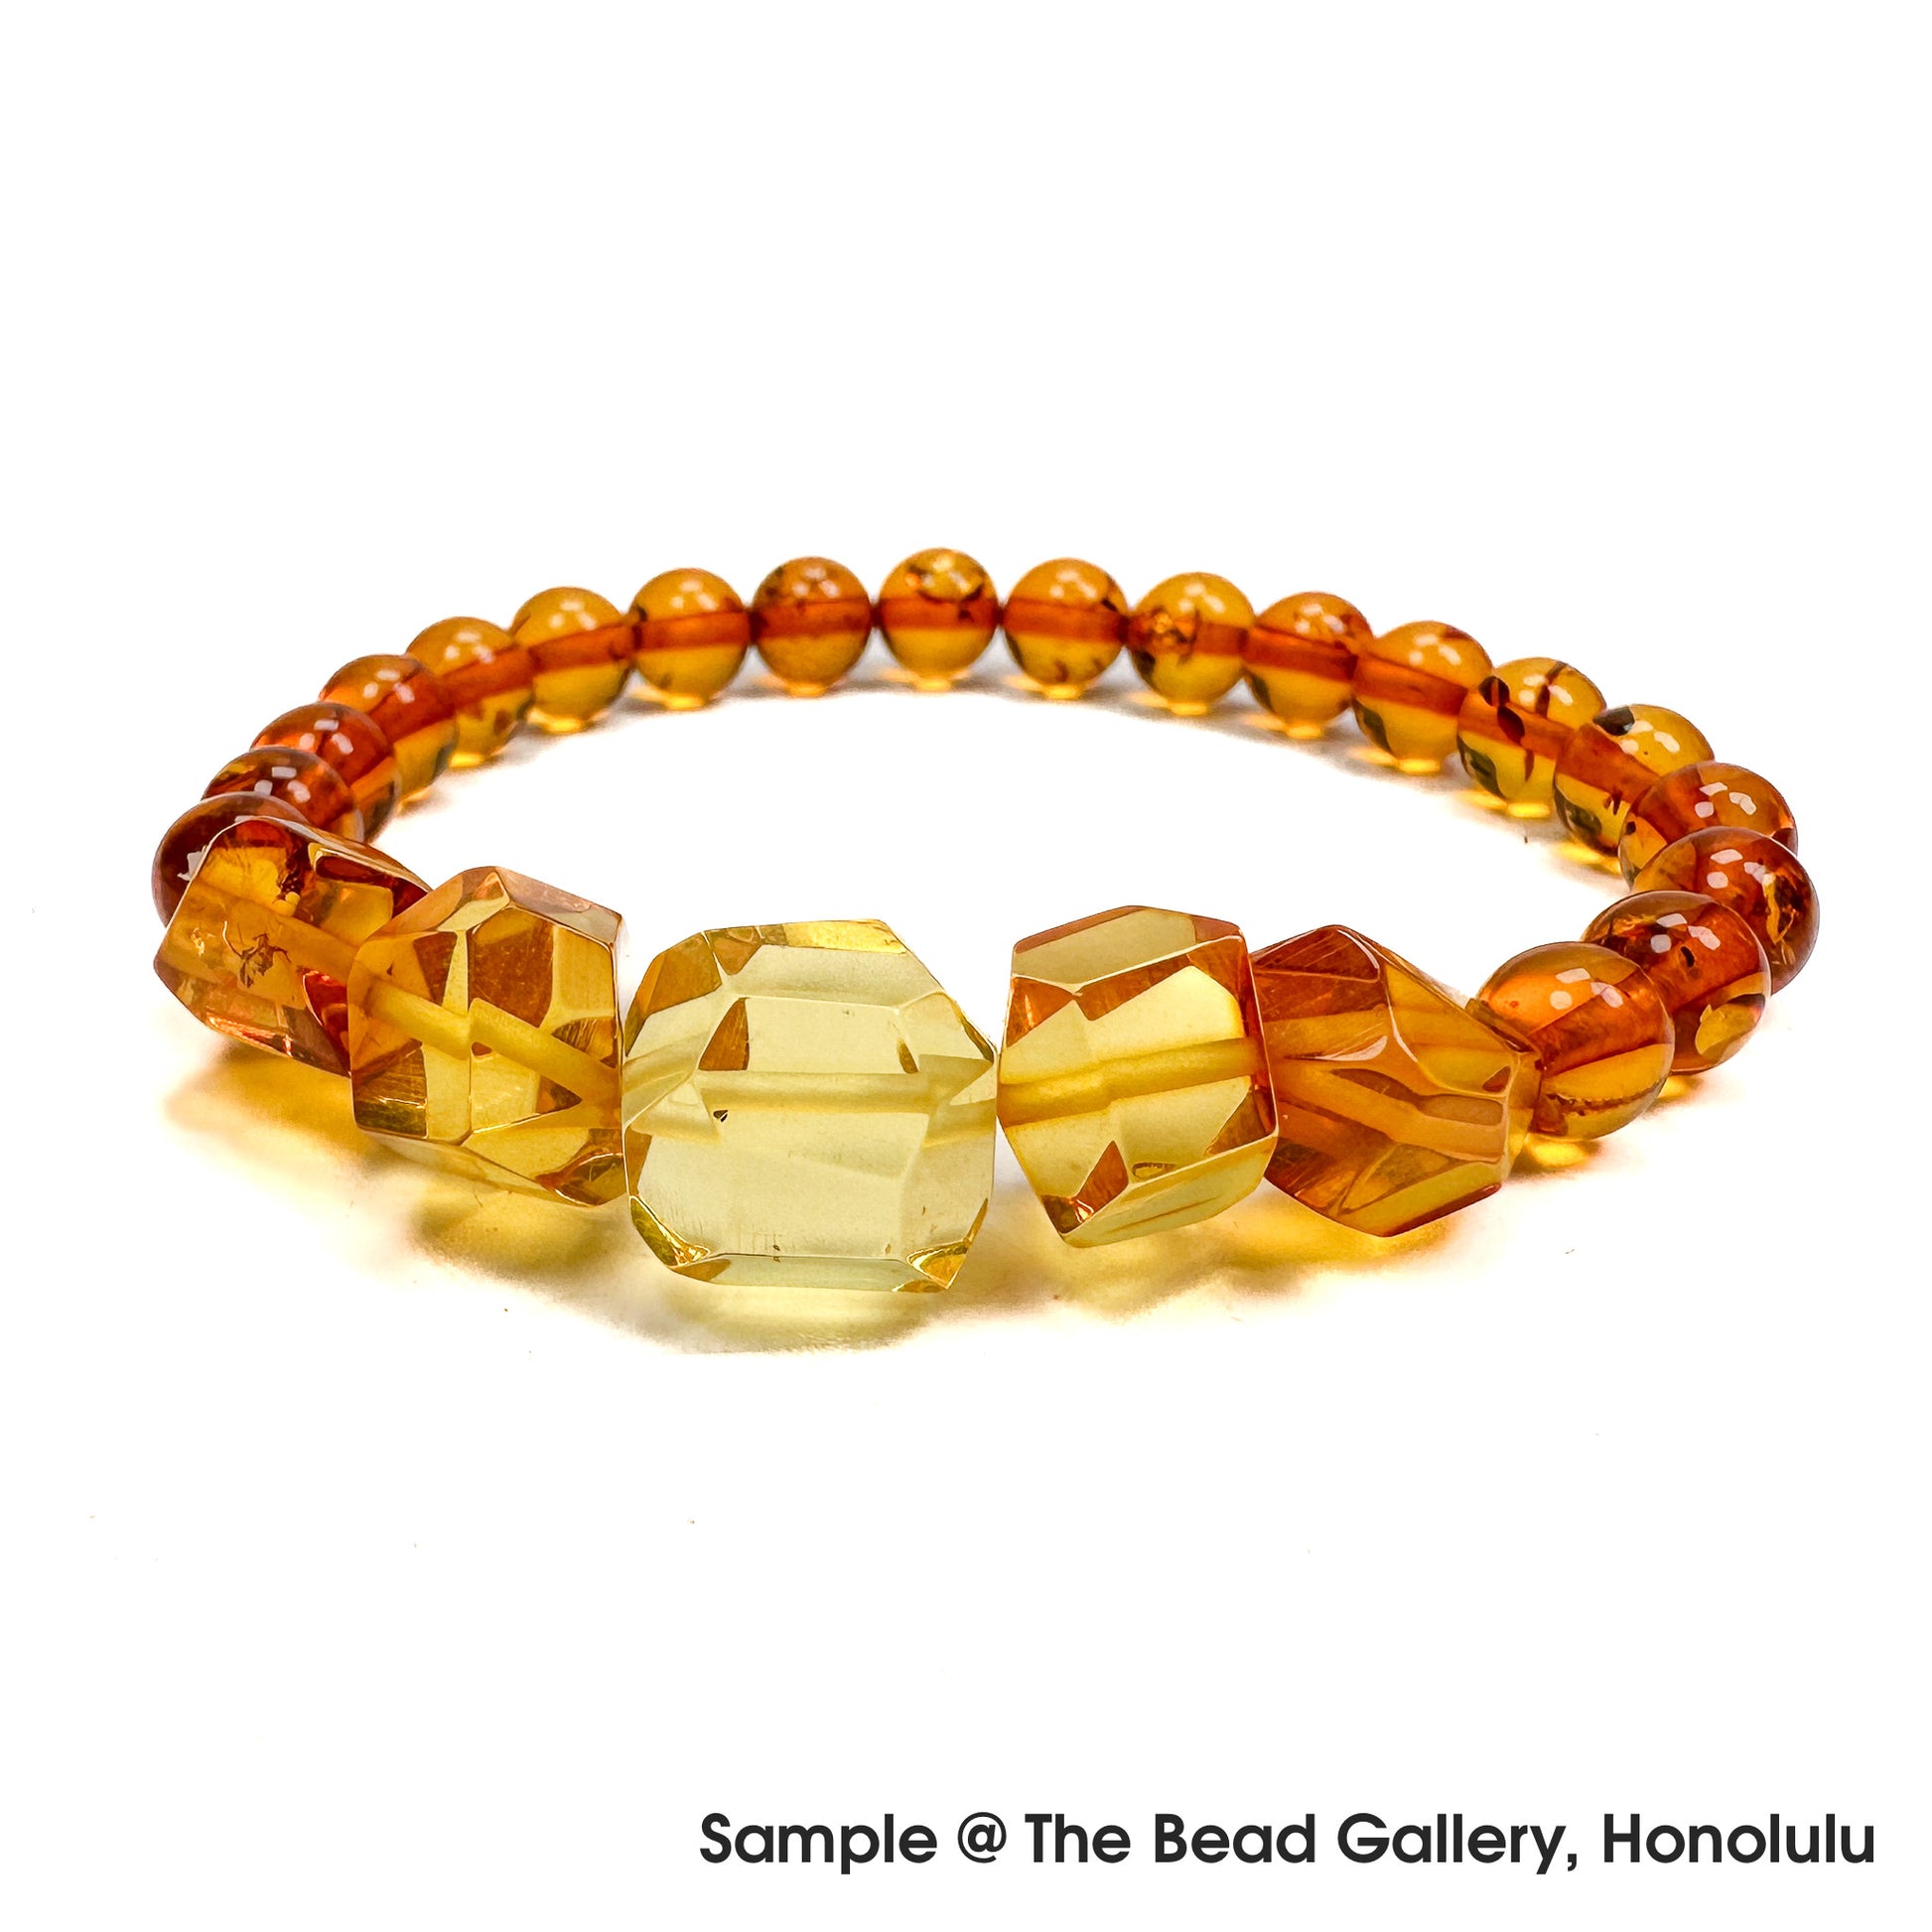 Amber 11-13mm Faceted Long Drill Bead - 1 pc.